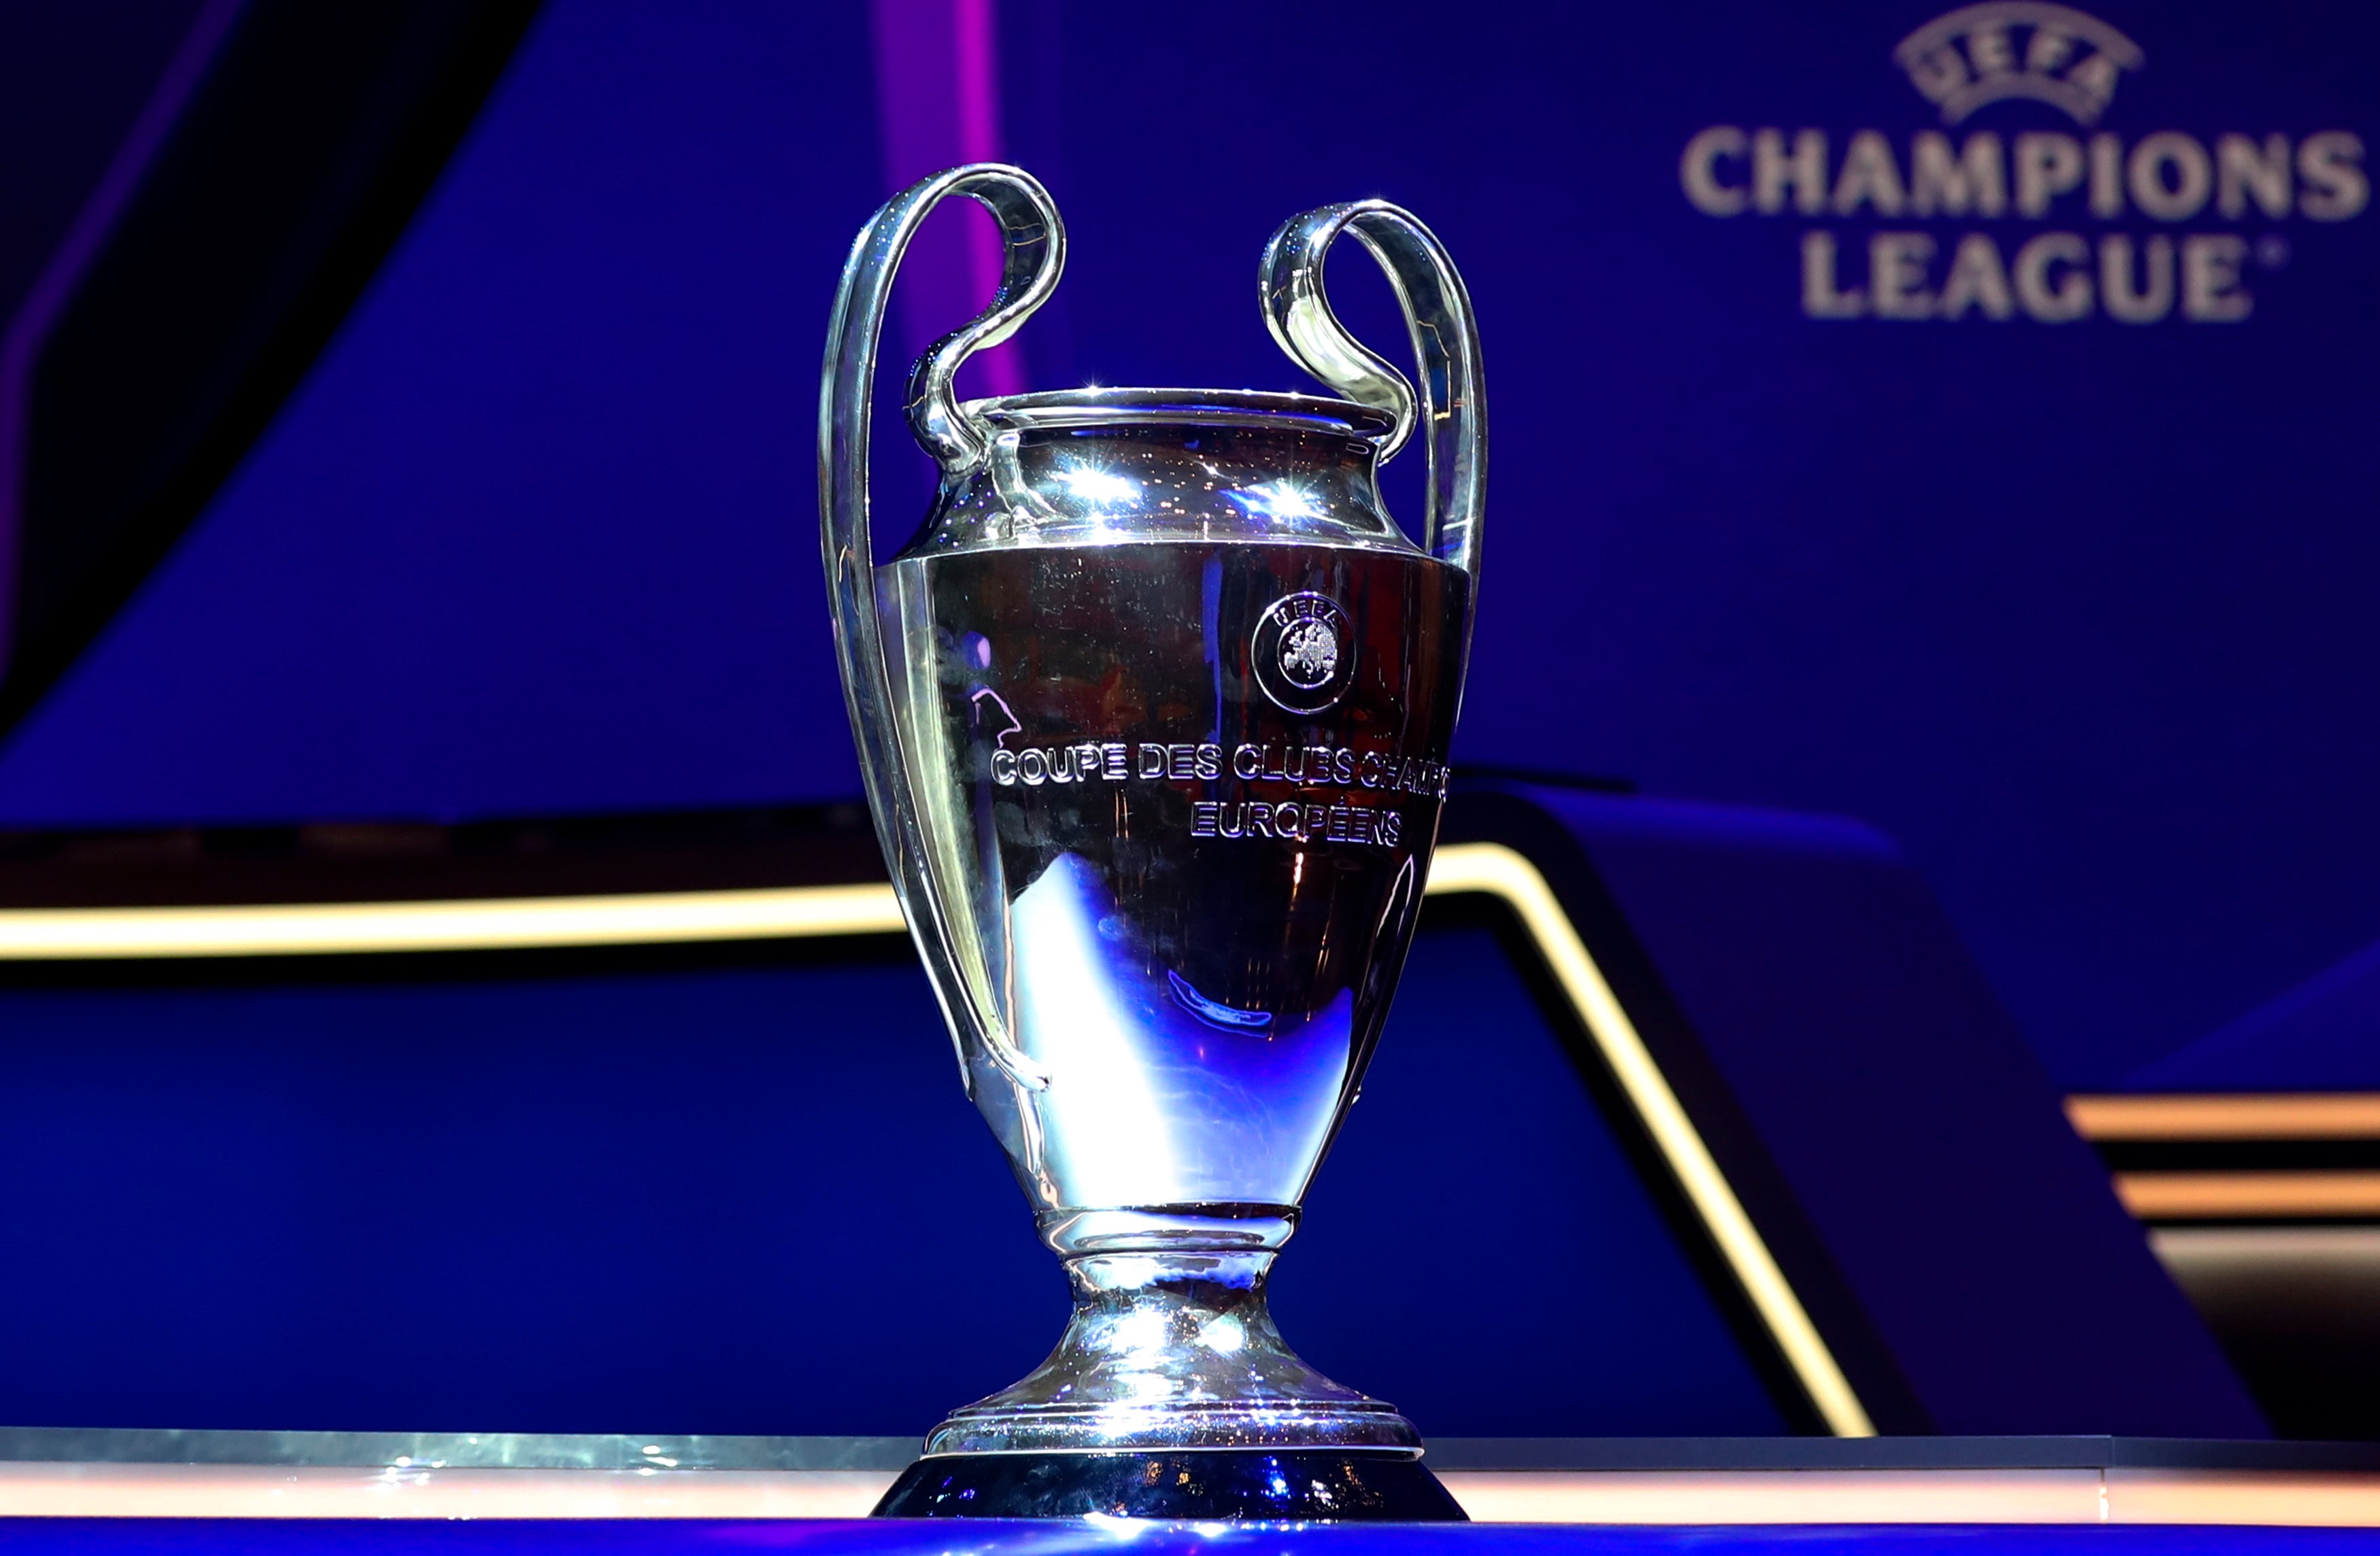 Experienced sides in second stage, UEFA Champions League